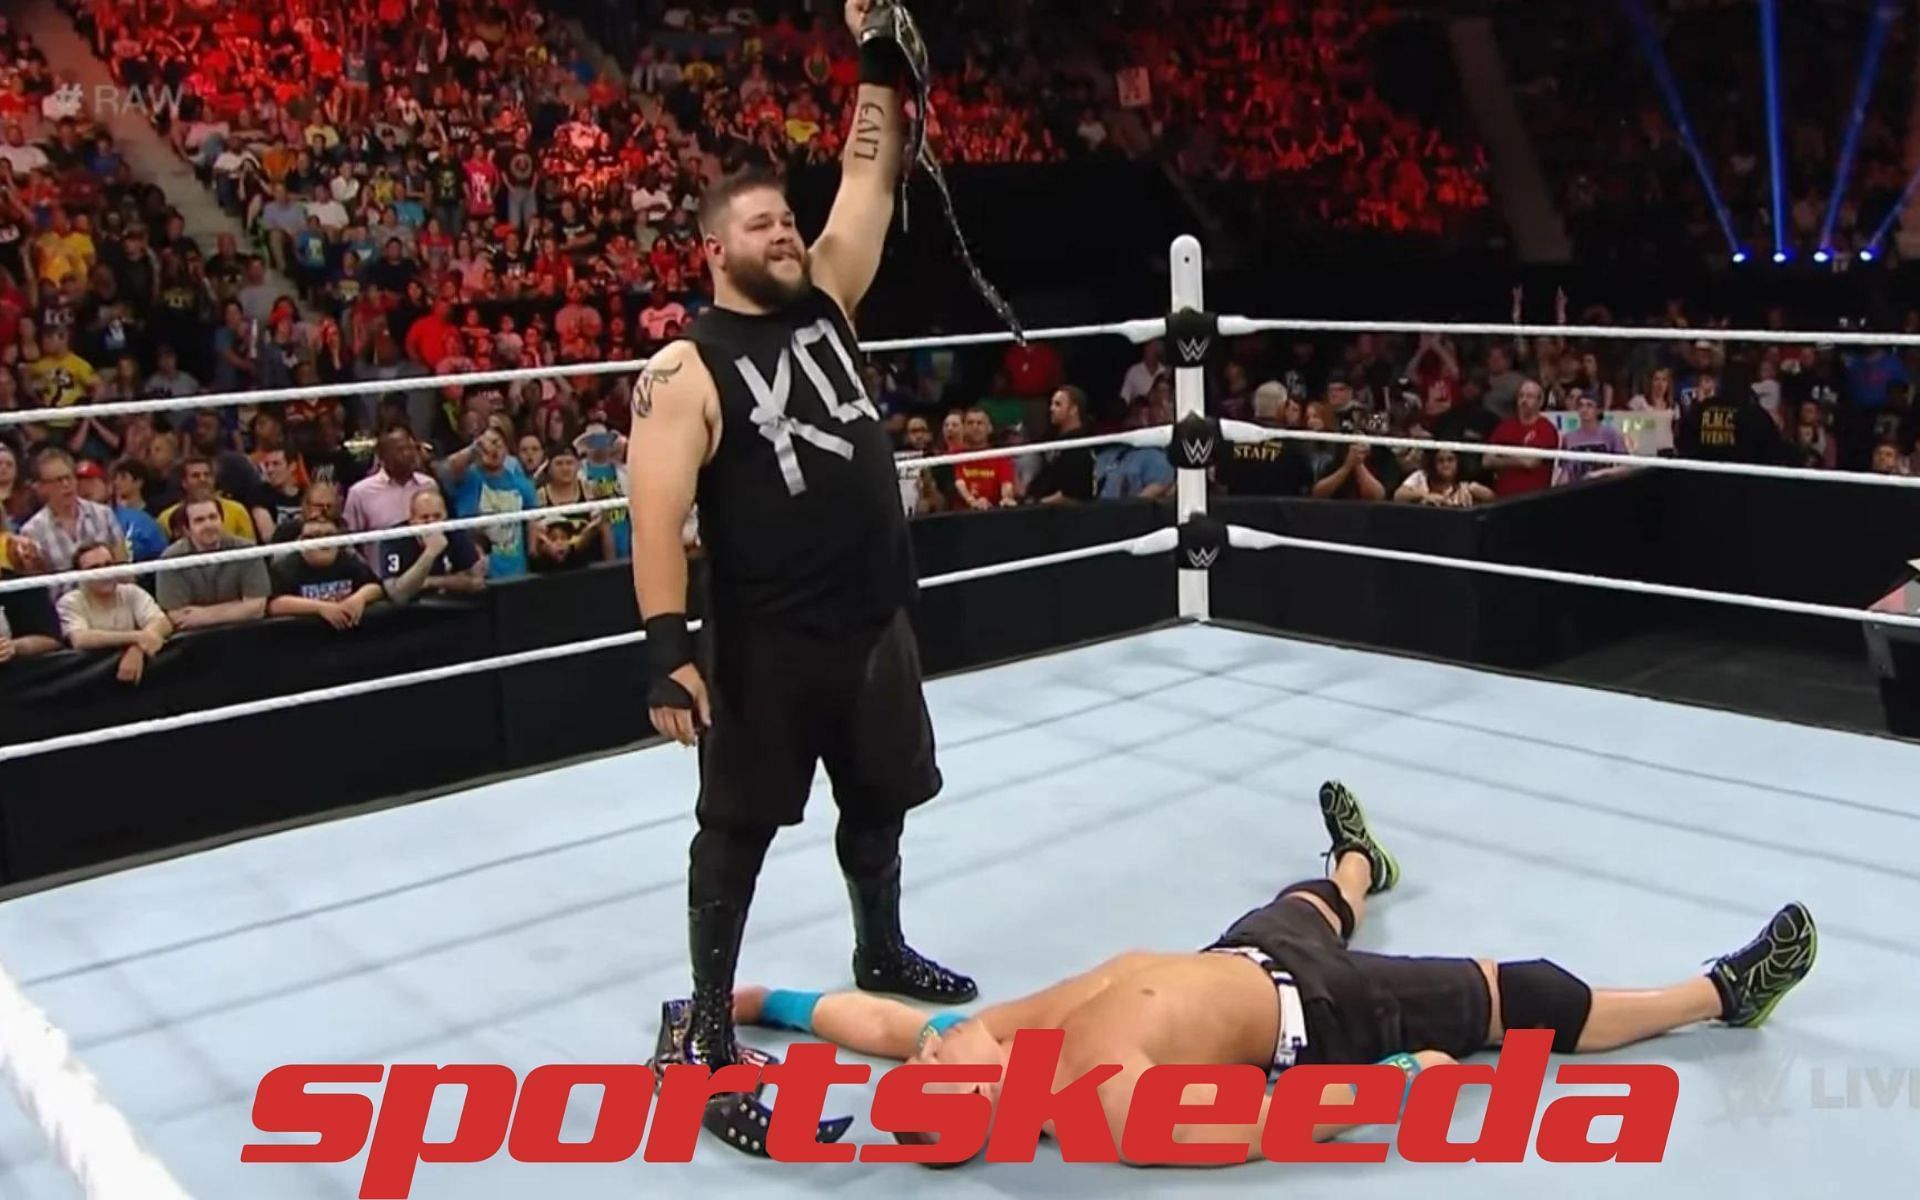 Kevin Owens confronts Cena on WWE RAW.